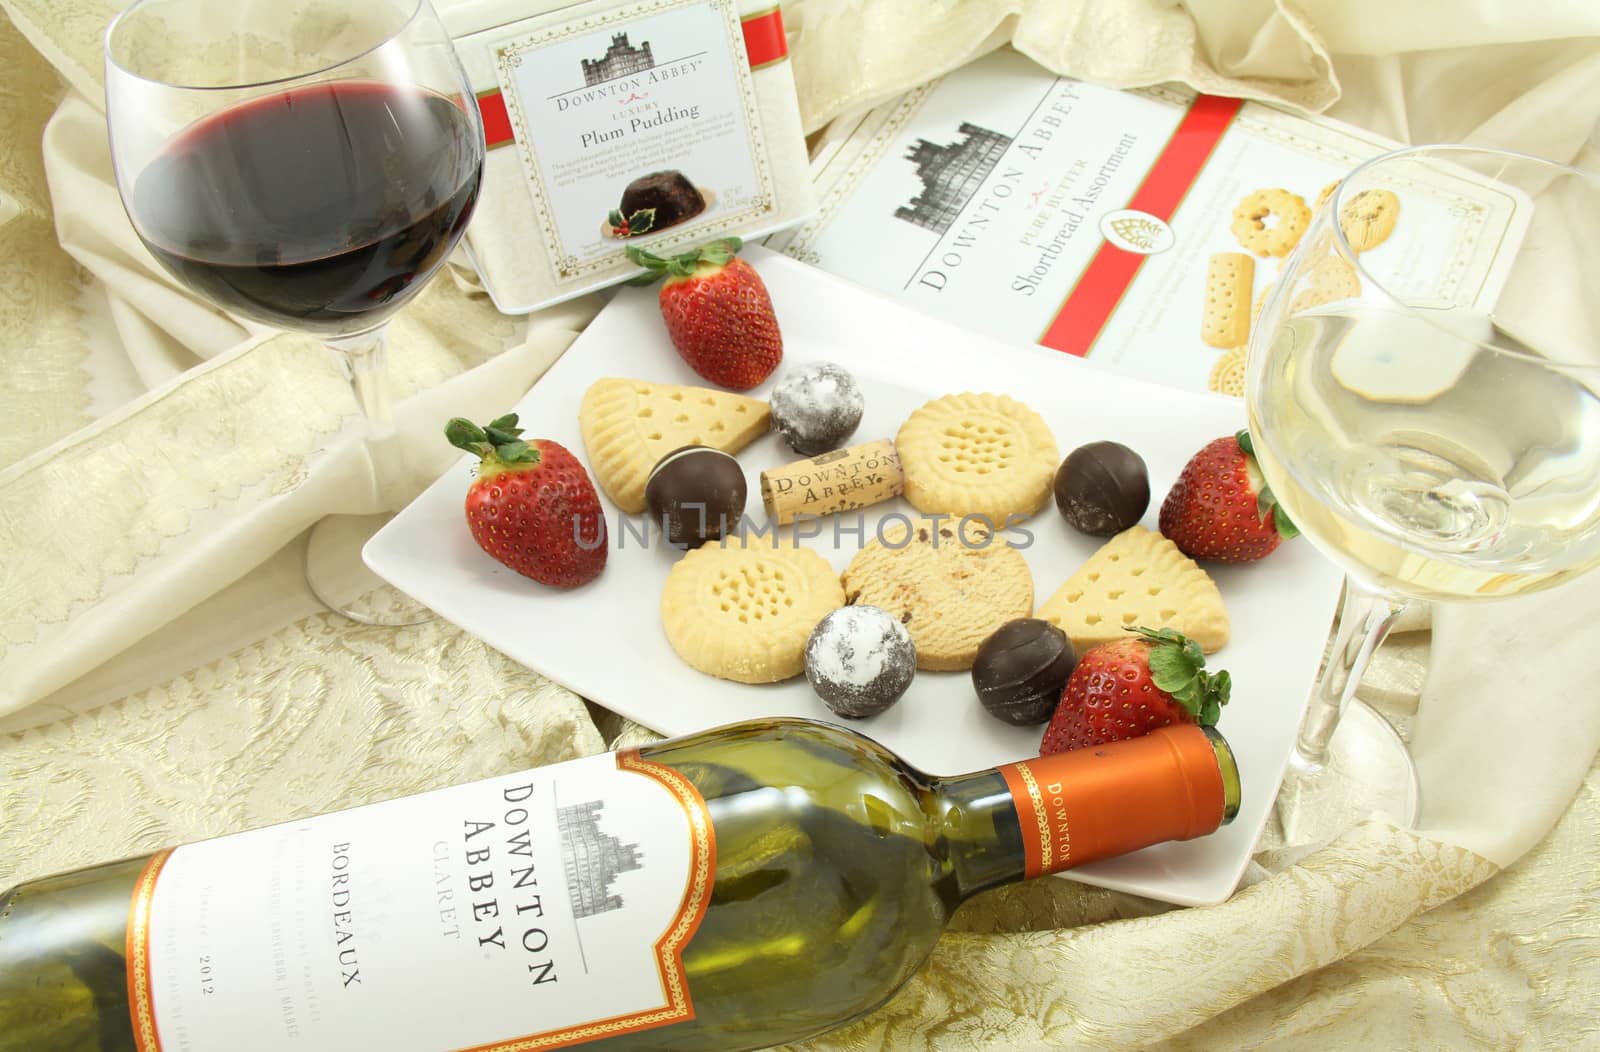 FRISCO, TX USA - February 13, 2014: Downton Abbey wine, shortbread and plum pudding with strawberries and chocolates. The show is an international hit series about an English manner in the early 1900's seen on  PBS Masterpiece.